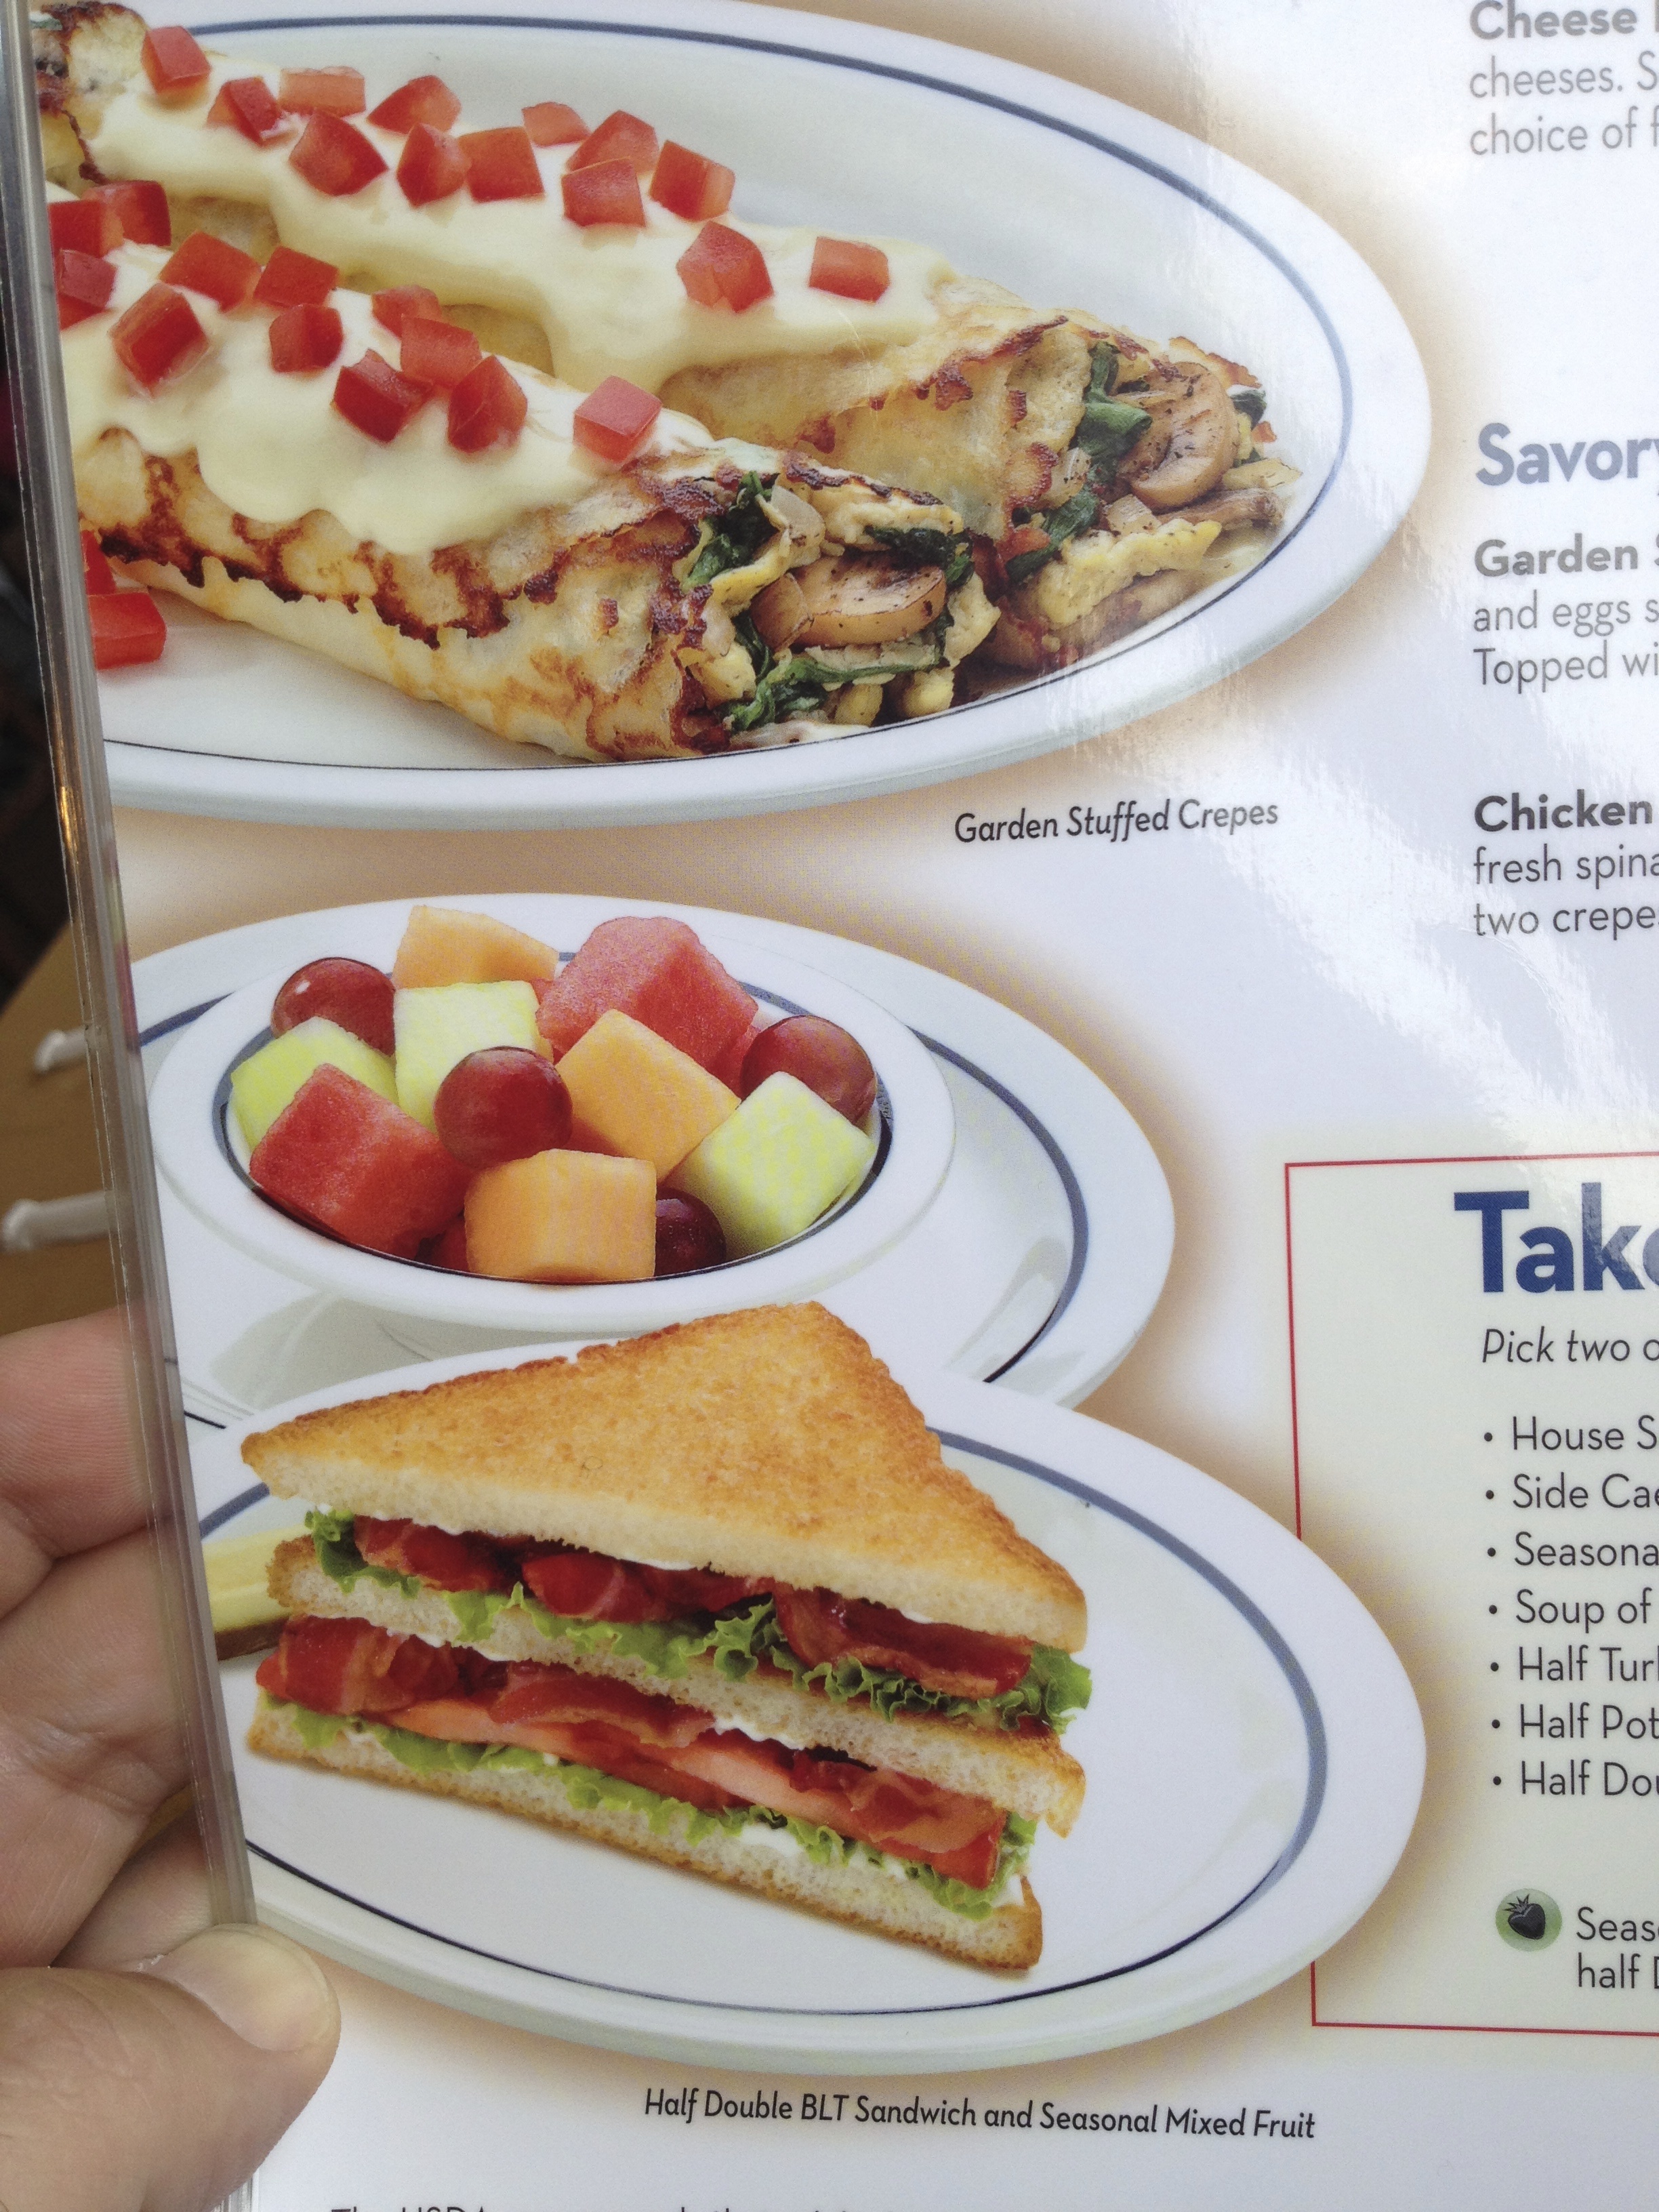 IHOP displays food that looks too perfect to be eaten.